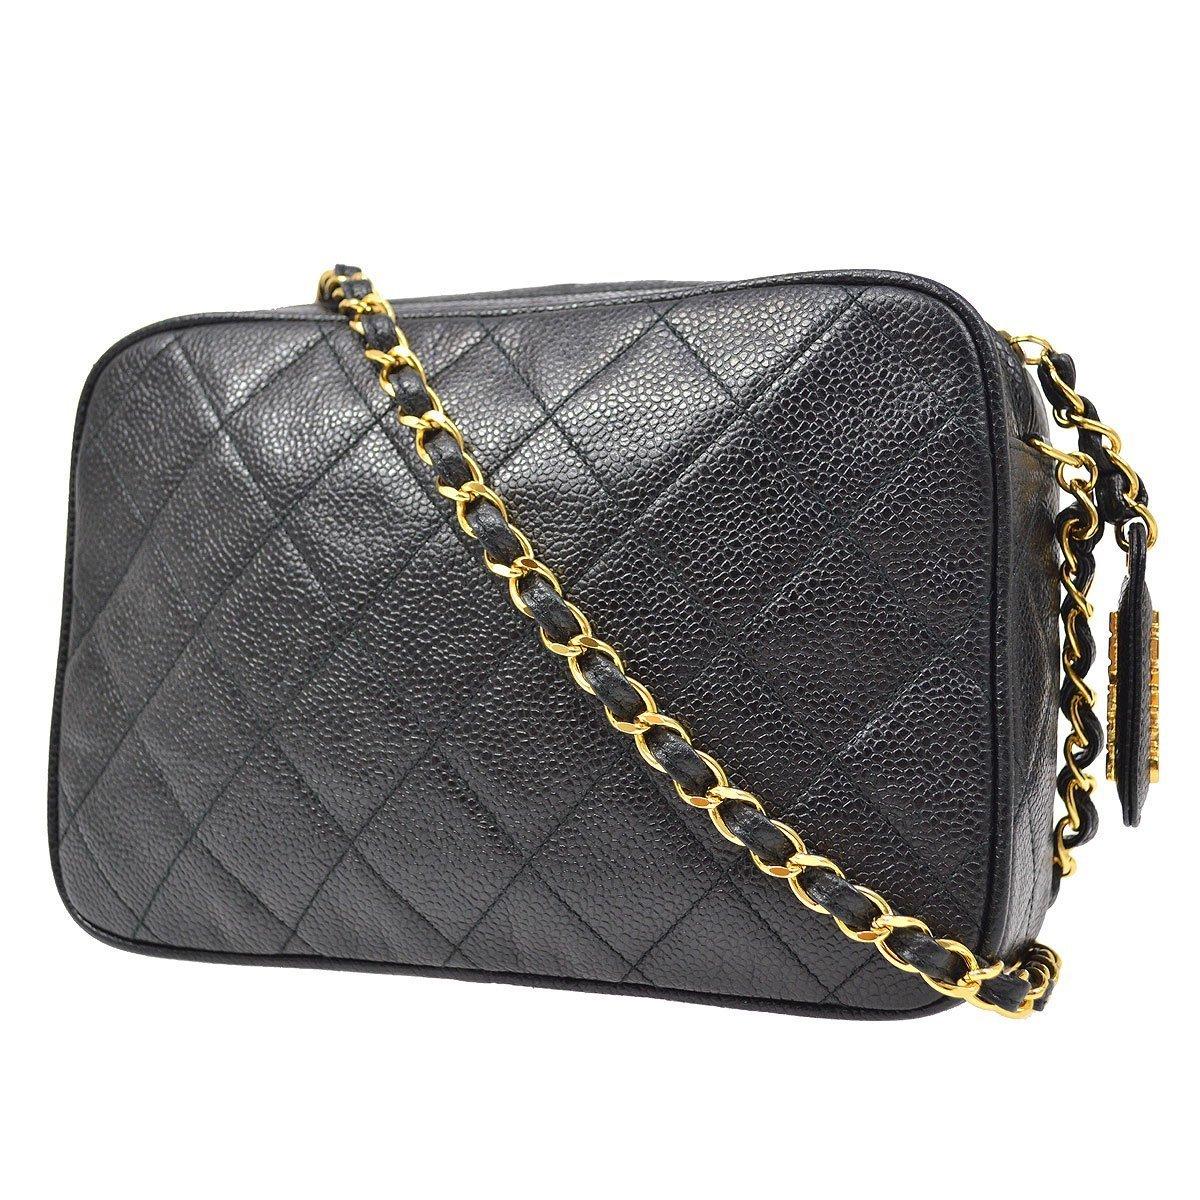 CHANEL Black Caviar Leather Hardware Small Camera Party Evening Shoulder Bag For Sale 1